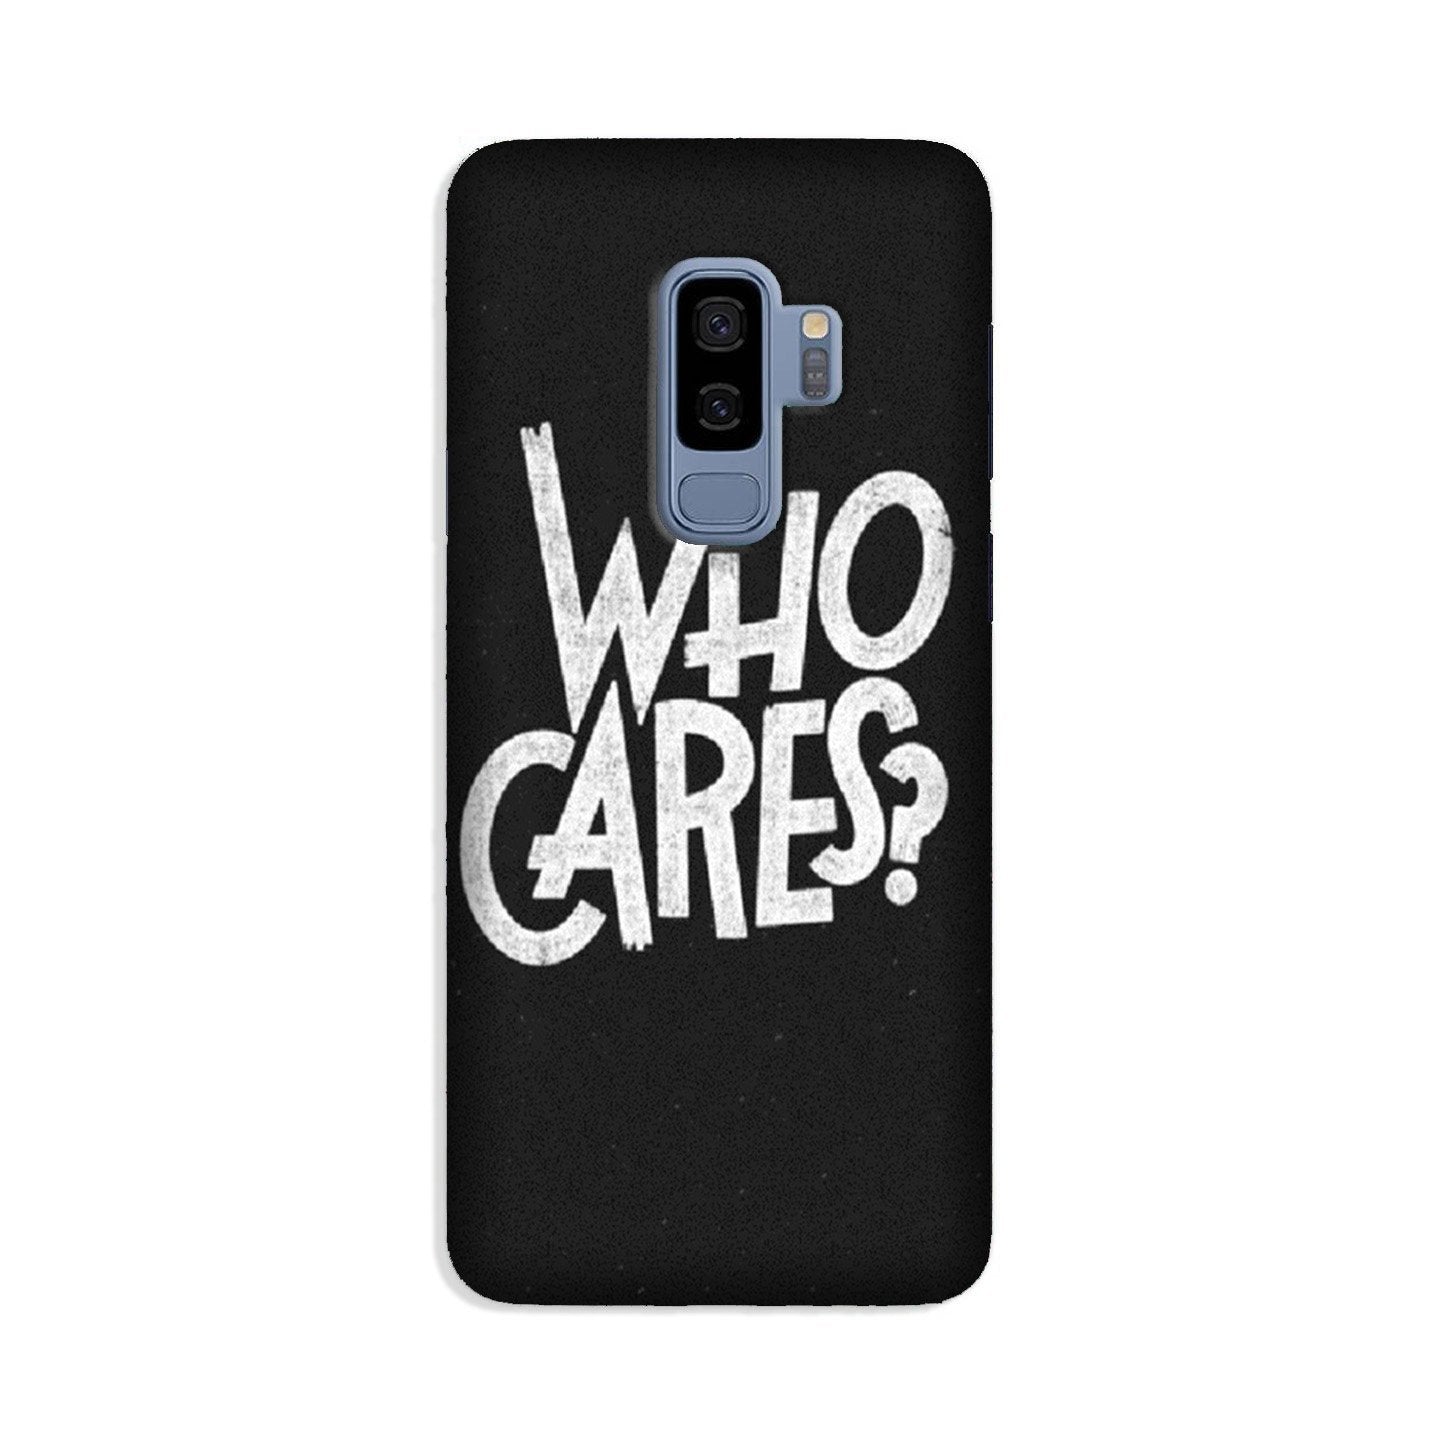 Who Cares Case for Galaxy S9 Plus